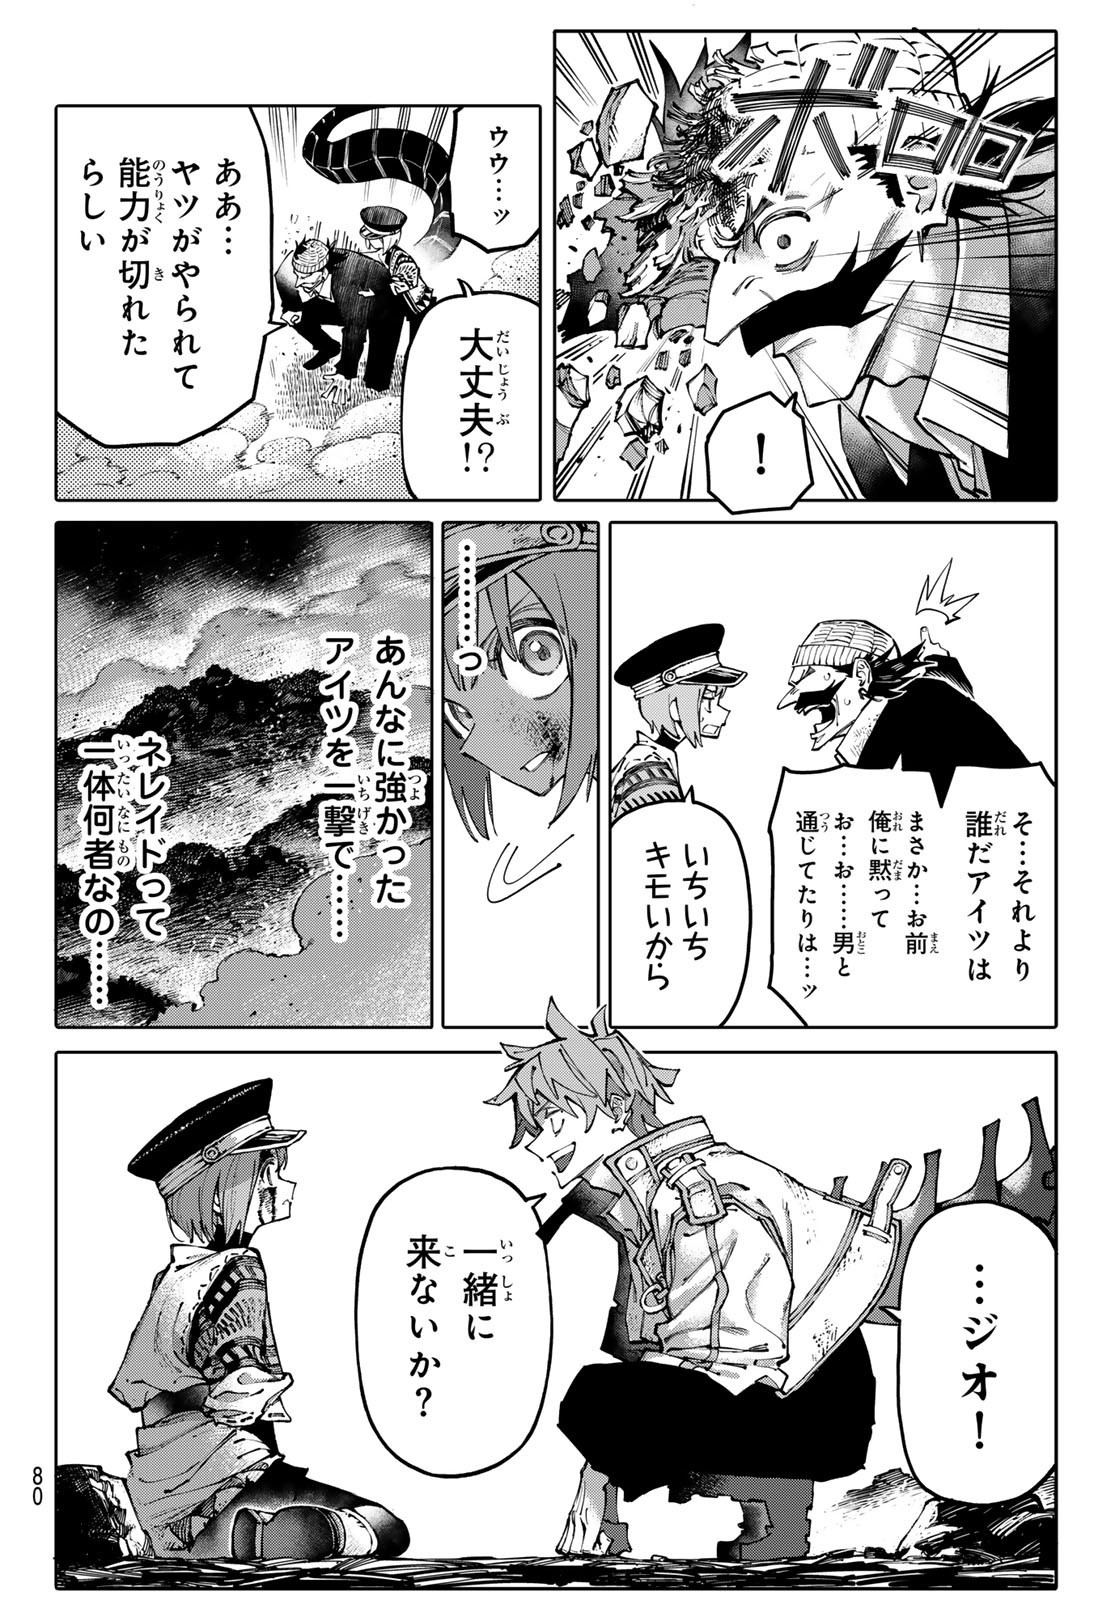 Weekly Shōnen Magazine - 週刊少年マガジン - Chapter 2024-33 - Page 78